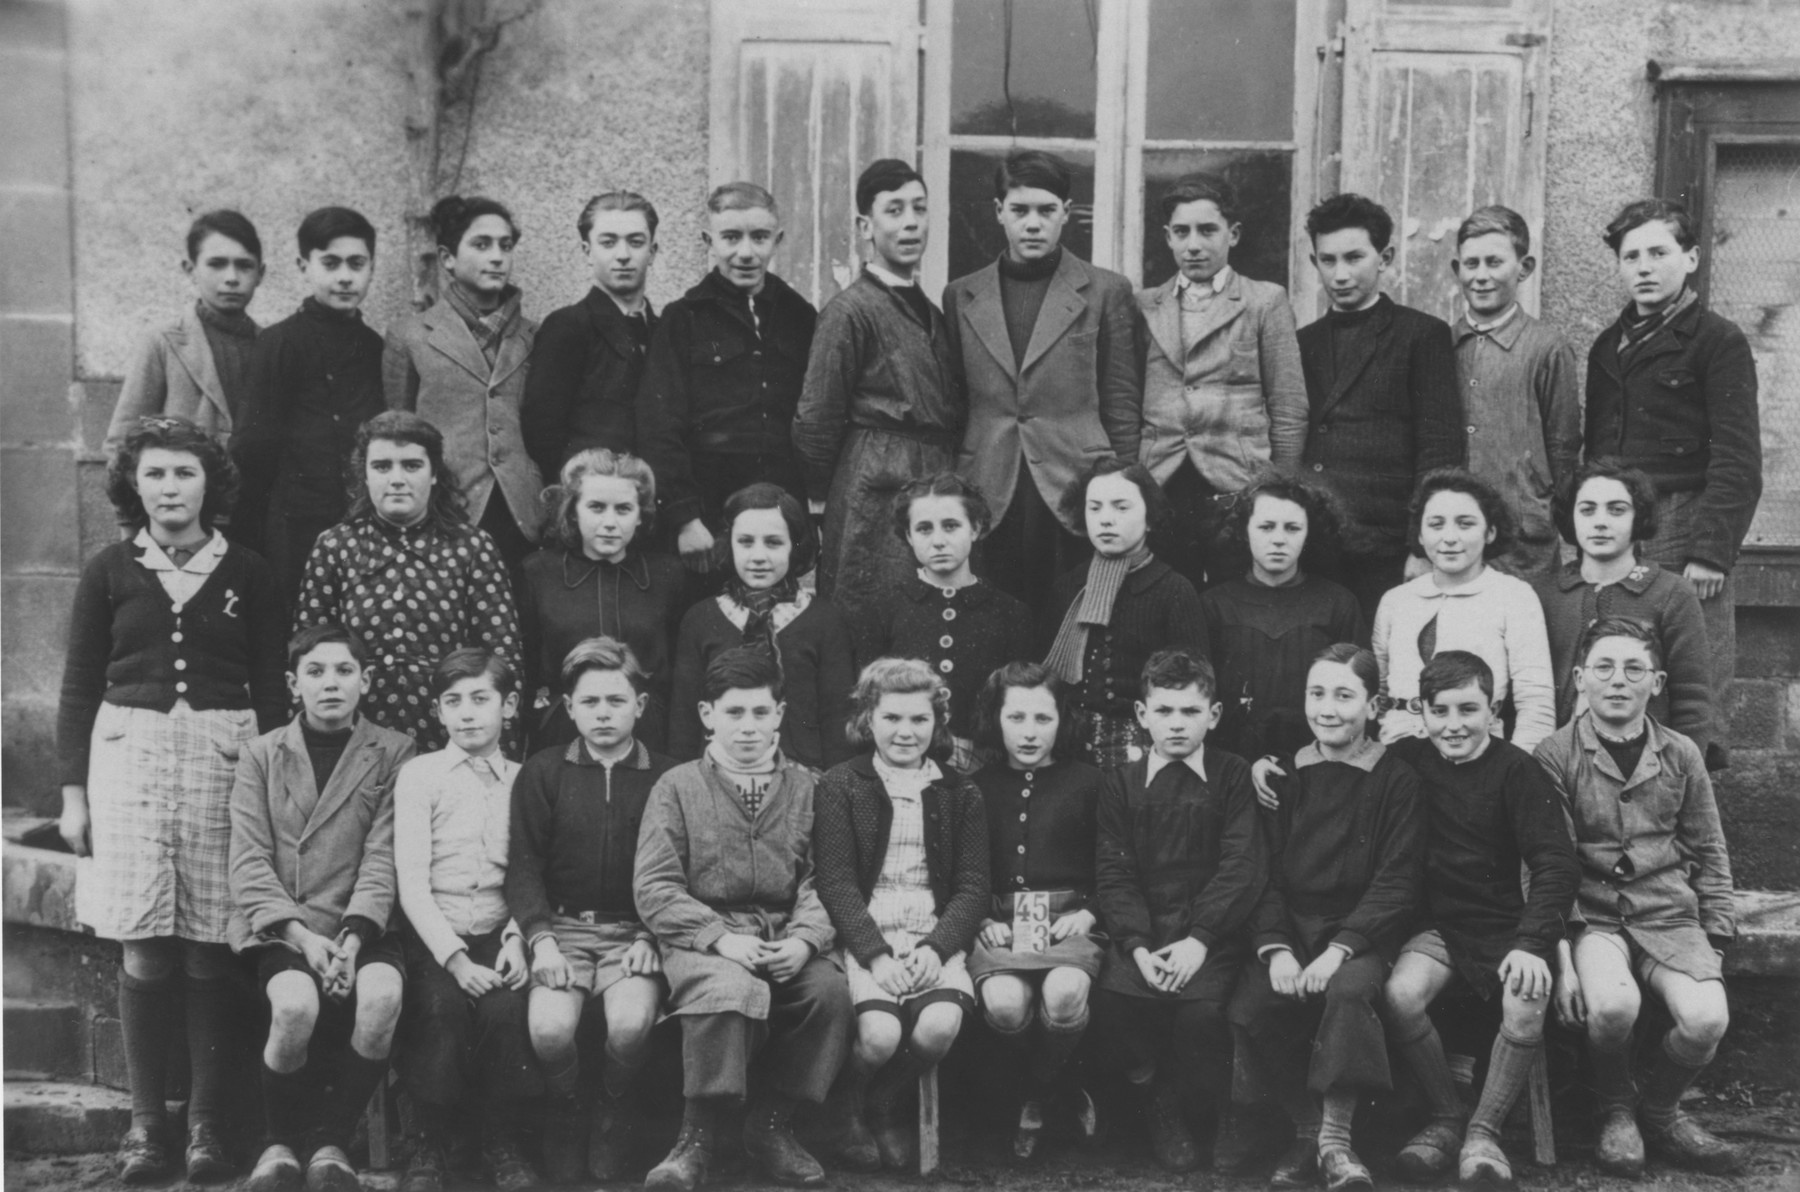 Class portrait of students at the Ecole Saint Pierre de Fursac, a school attended by Jewish refugee children living at the Chabannes children's home, as well as those from the village. 

Pictured in the front row, from left to right are: unknown; Pierre Lafaye; Jo Jacob; unknown; Renaud; Andre Dubois; unknown; Margot Weinberg; Plavinet; Andre Lelong; Kostia Sotnikov.  Second row: Paulette Leblanc; Marcelle Fedon; unknown; Grosset; Irene Clement; Jeanne Luguet; Paulette Legris; Gisele Brunetaud; Ginette Chanliat.  Third row: Mamet; Georges Loeffler; Norbert Bikales; Michel Razymovsky; Madeleine Boramier; Madeleine Basset; Anatole Zylberstein; unknown; unknown; unknown.